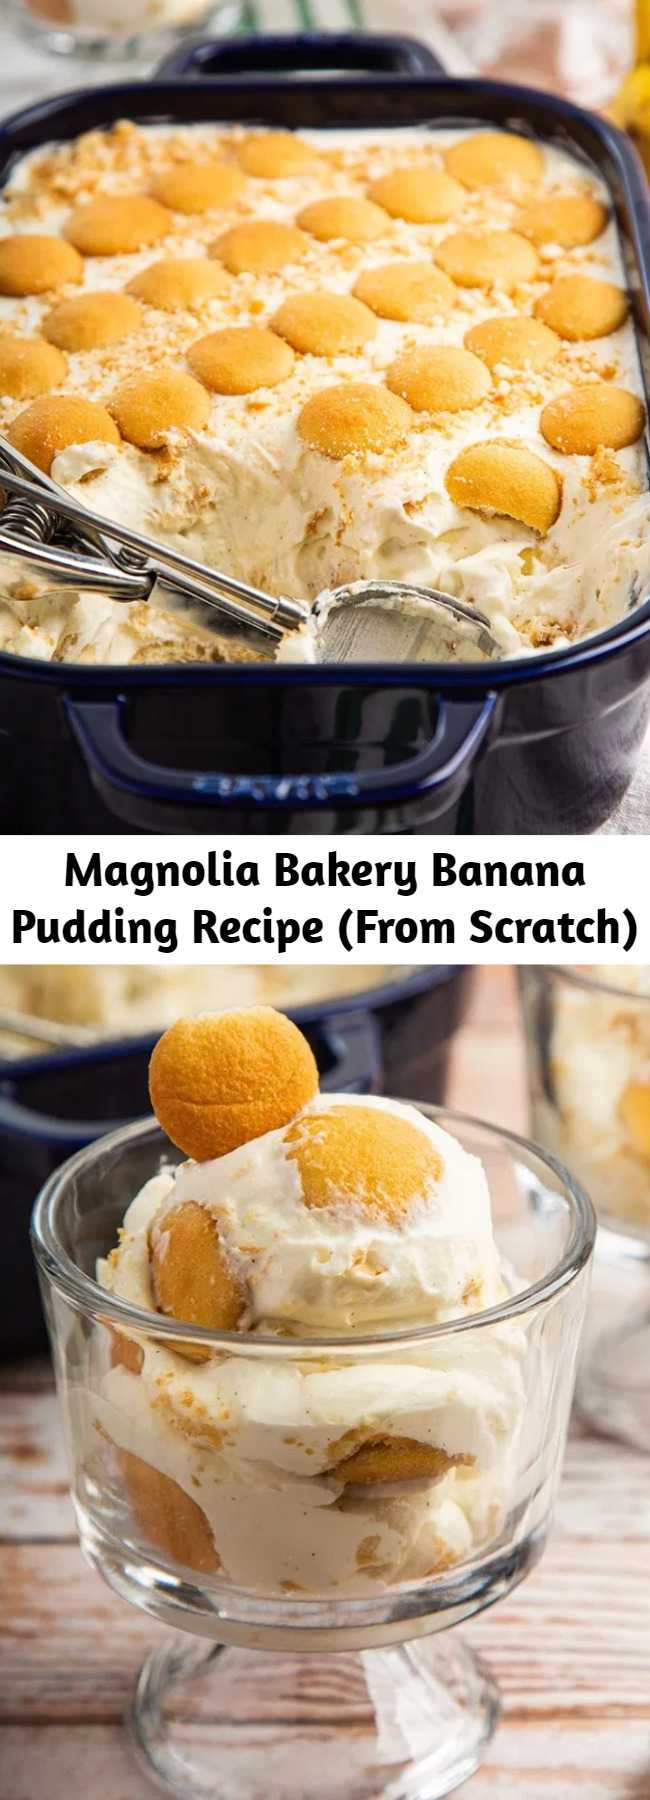 Magnolia Bakery Banana Pudding Recipe (From Scratch) - This Banana Pudding is a copycat recipe of Magnolia Bakery. Unlike regular banana pudding, this one has whipped cream mixed into the pudding. It’s fluffy & creamy. And now, you can make that at home from scratch (sorry, no instant pudding mix) with better ingredients, cheaper & more! #magnoliabakery #copycatrecipe #banana #pudding #bananapudding #partyfood #dessert #dessertrecipe